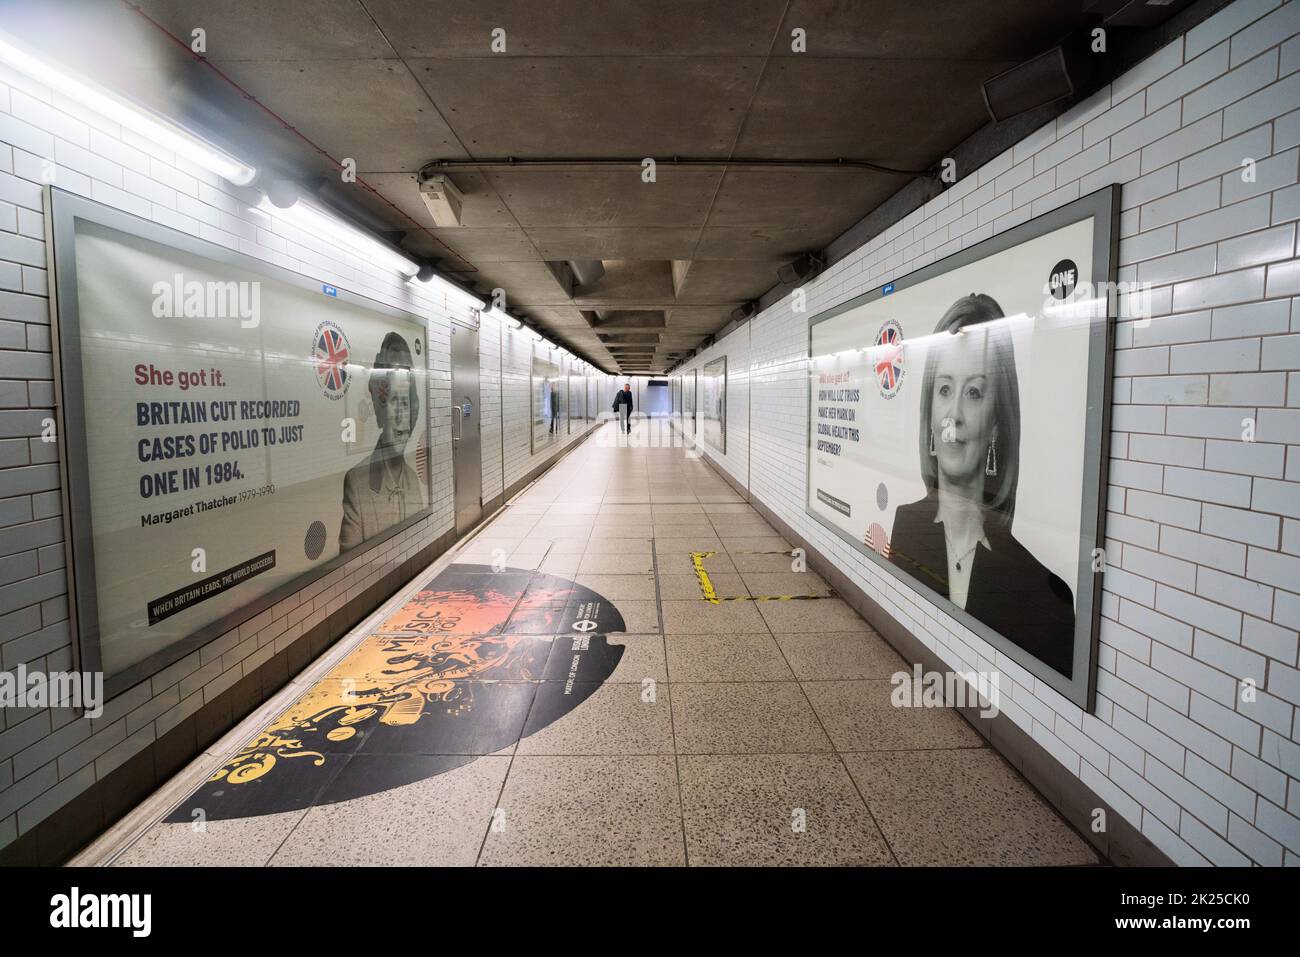 London UK. 22 September 2022.  Former and Current Conservative PM Margaret Thatcher and Liz Truss. A poster on the London Underground  by One Global Campaign to highlight the impact British Prime Ministers have had on global health to combat infectious diseases  Credit: amer ghazzal/Alamy Live News. Stock Photo